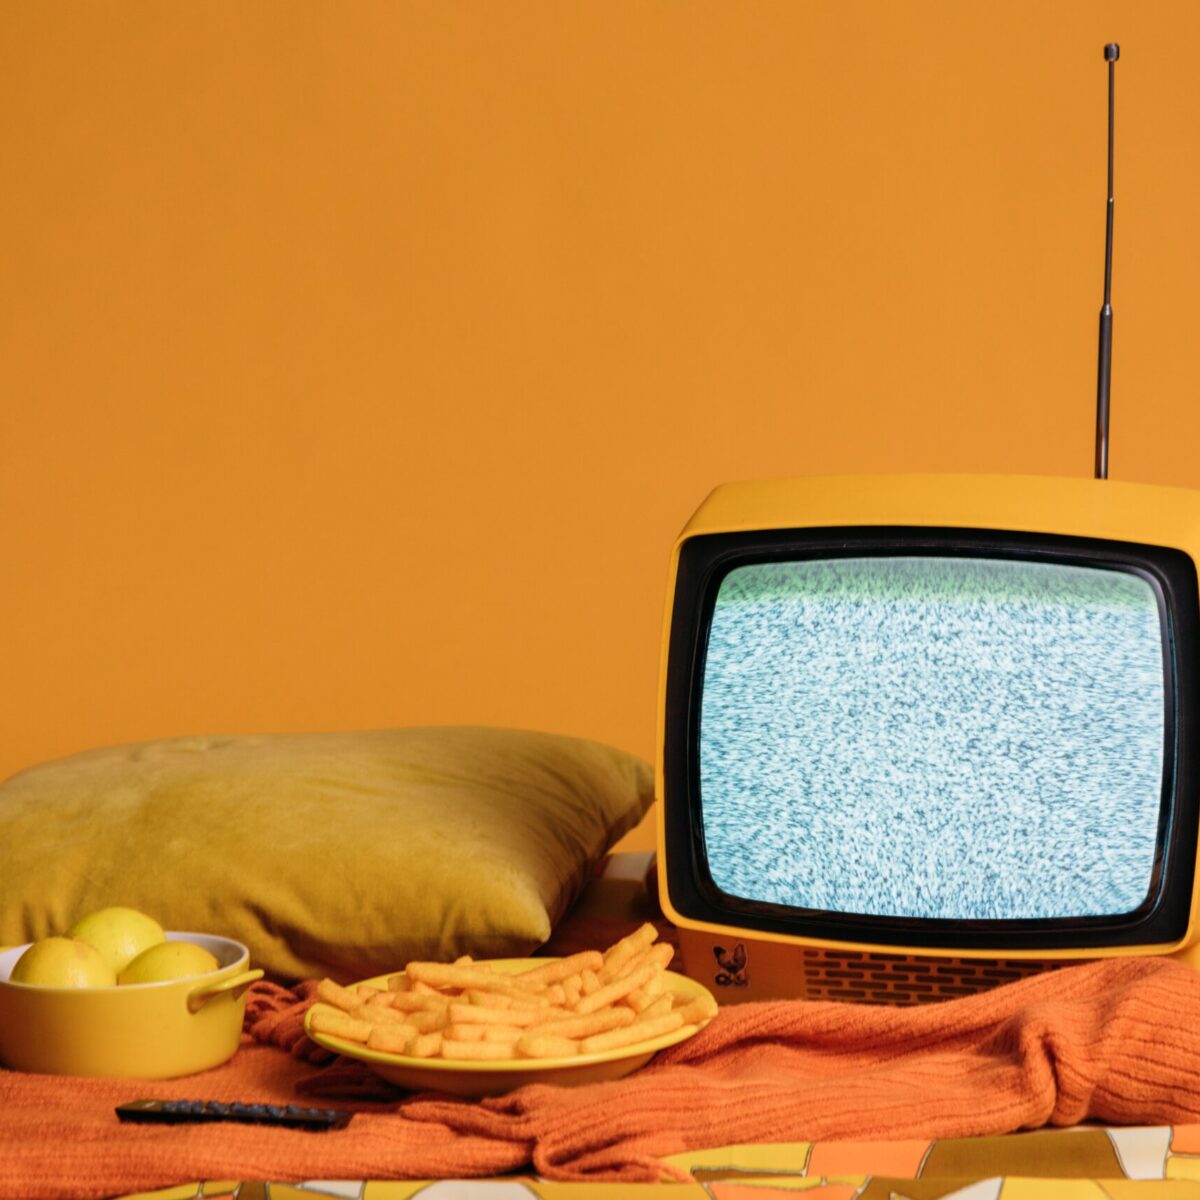 Small yellow TV showing static on a orange blanket next to a yellow pillow inside a room with yellow walls